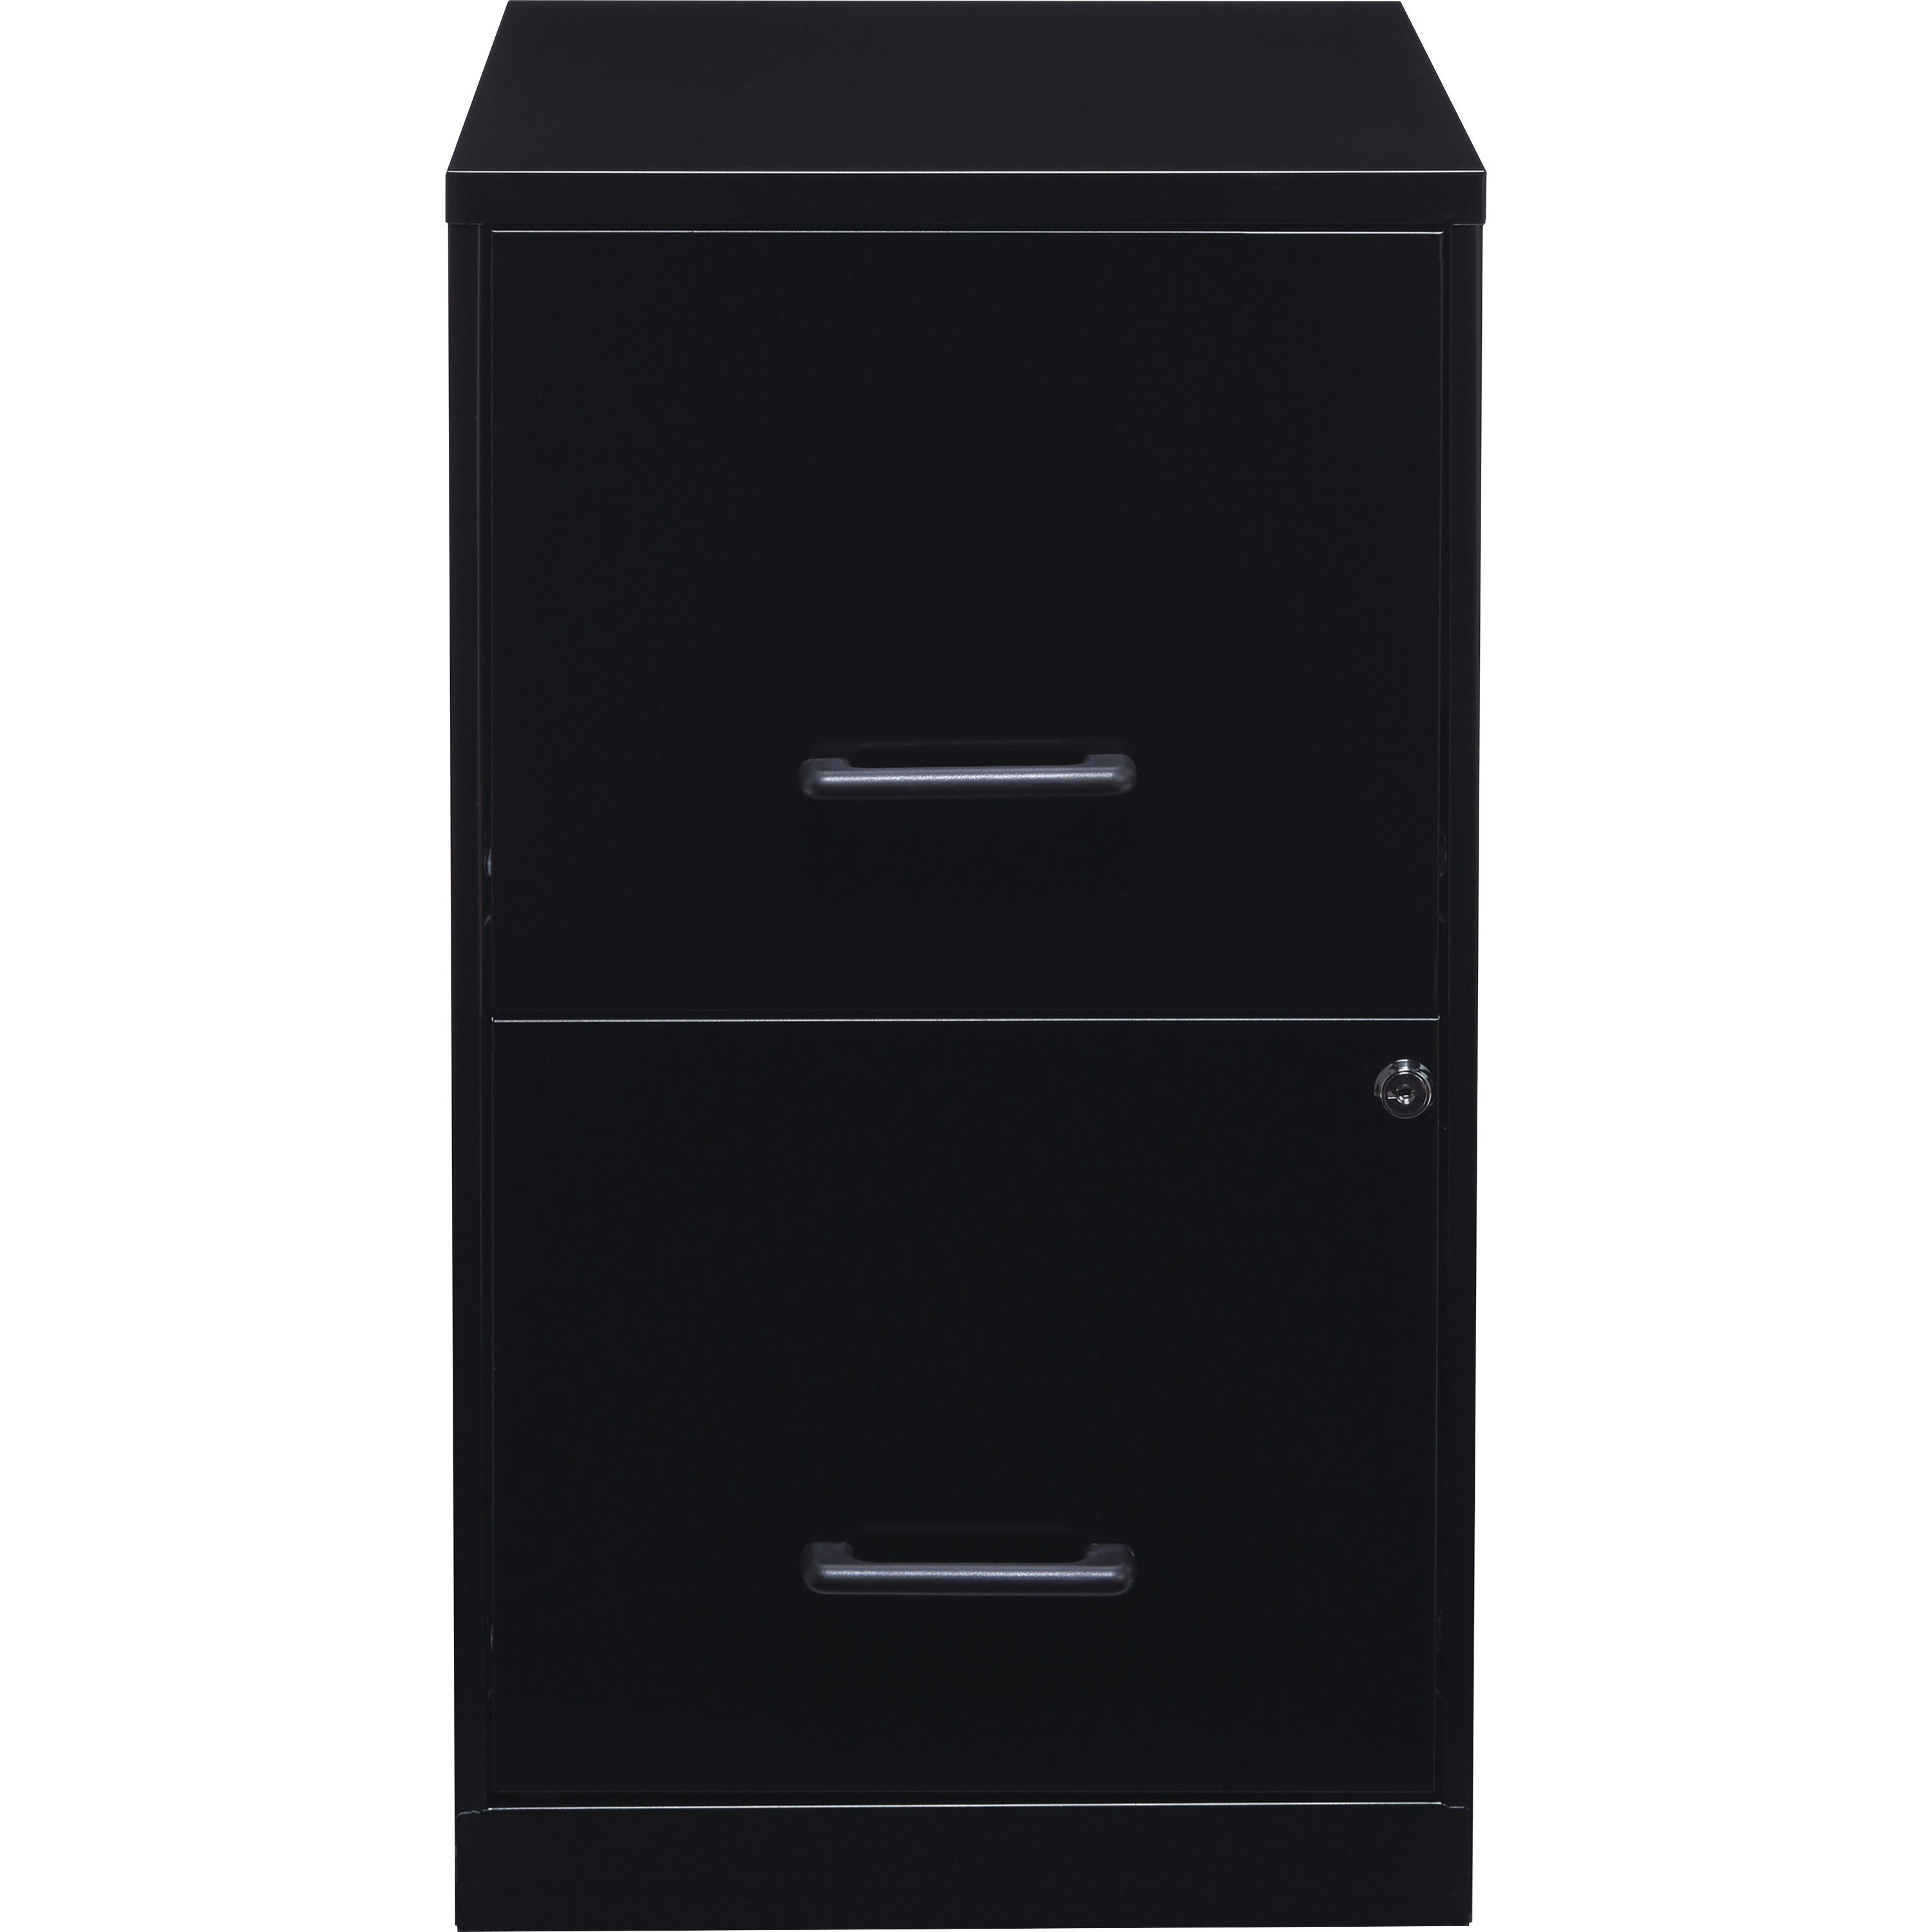 nusparc-file-cabinet-142-x-18-x-245-2-x-drawers-for-file-letter-vertical-locking-drawer-glide-suspension-nonporous-surface-black-baked-enamel-steel-recycled_nprvf218aabk - 2